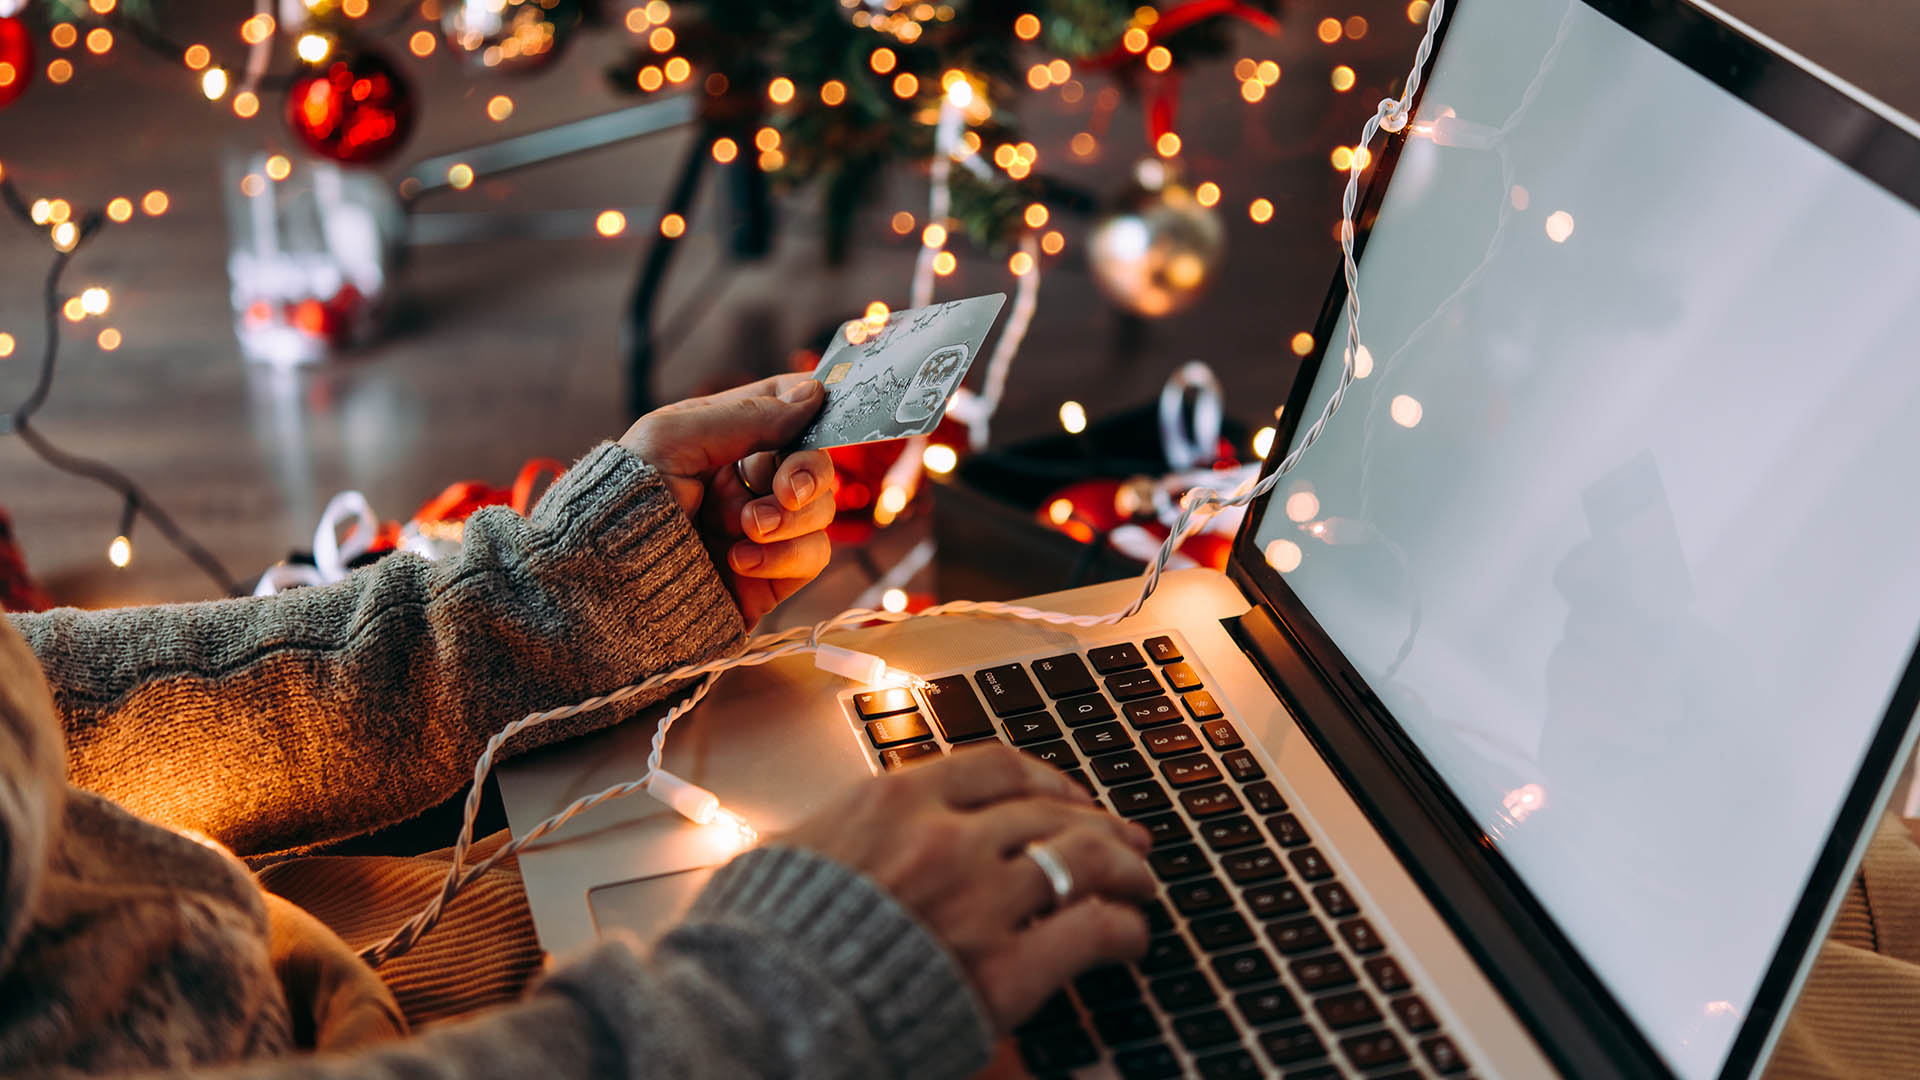 Make the Most of Christmas with Facebook’s Marketing Guide